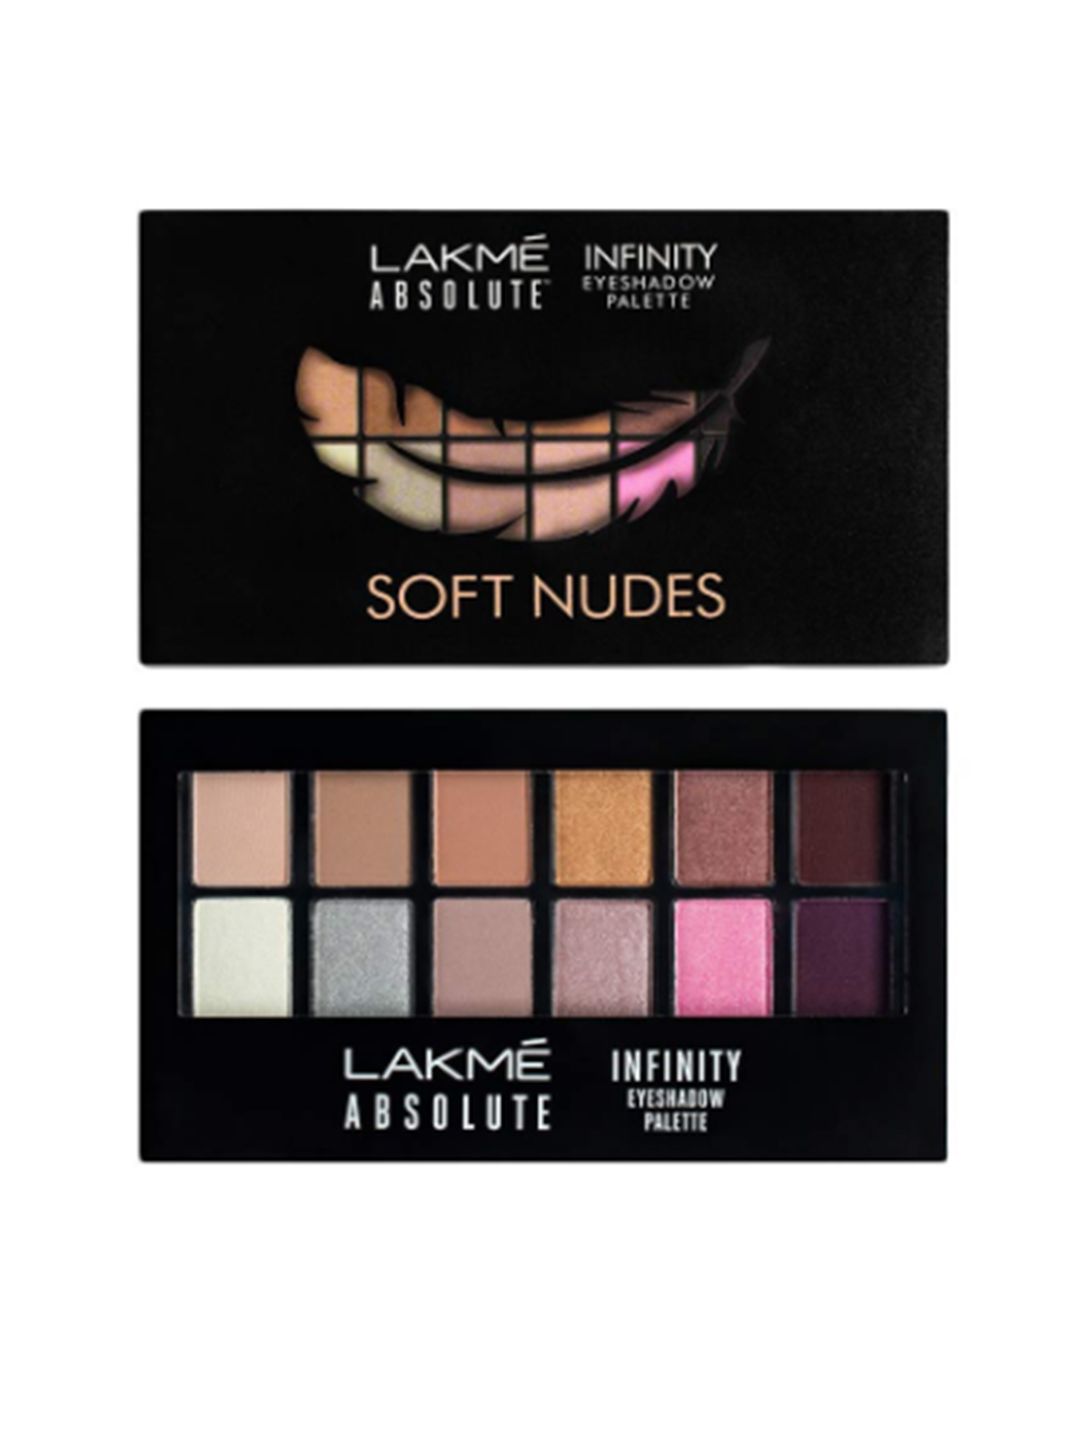 Lakme Absolute Infinity Eye Shadow Palette - Soft Nudes 12 g Price in India